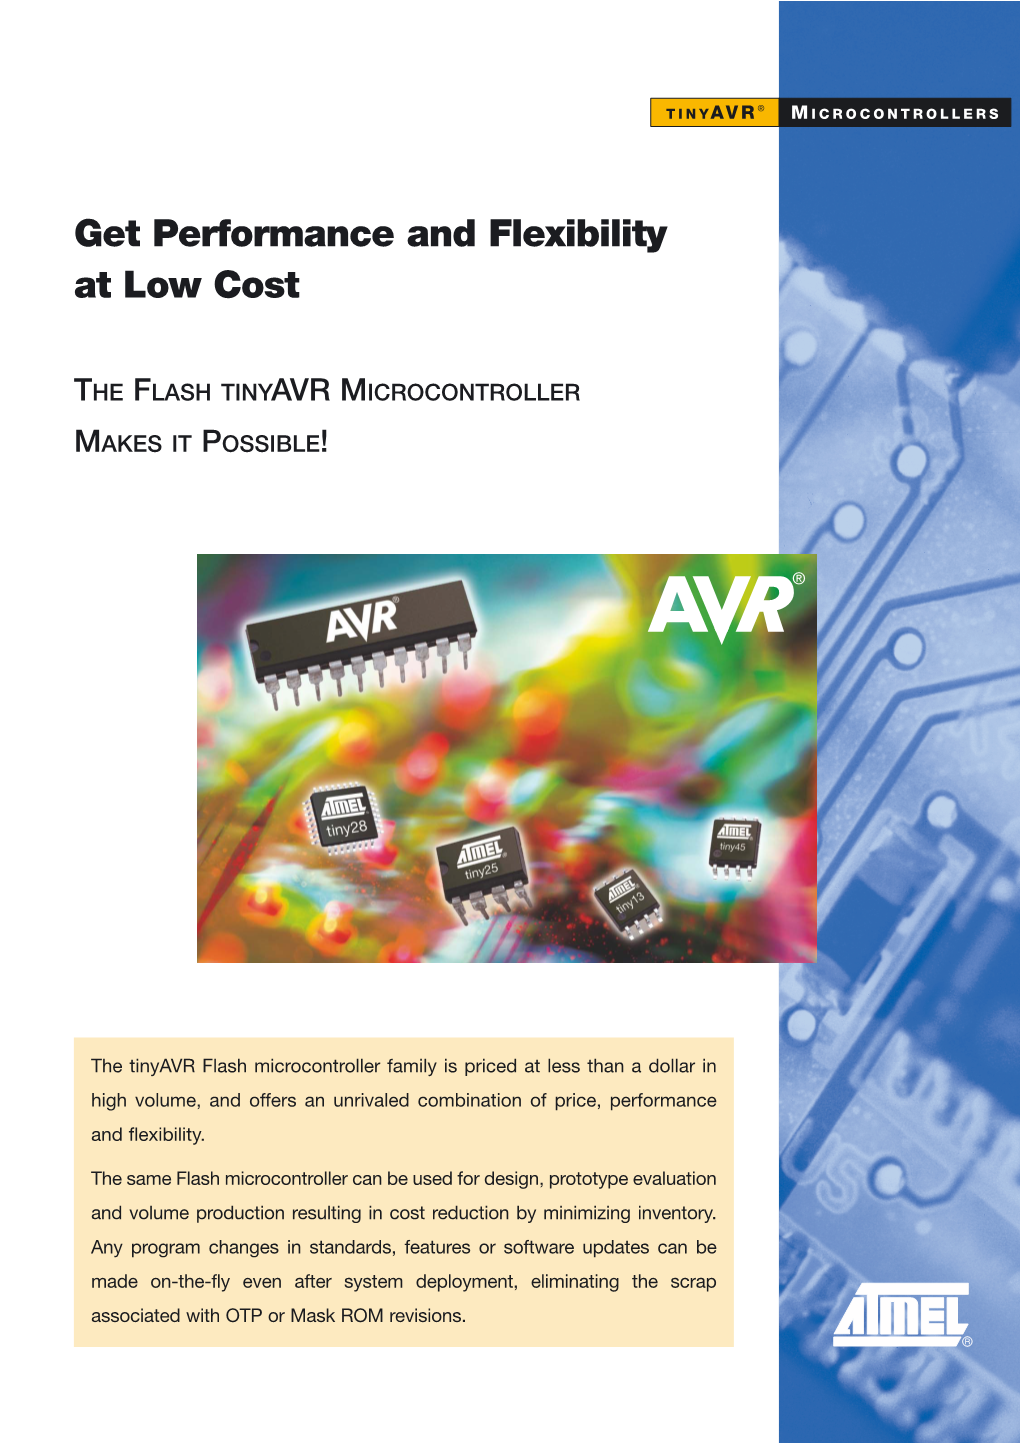 Tinyavr: Get Performance and Flexibility at Low Cost